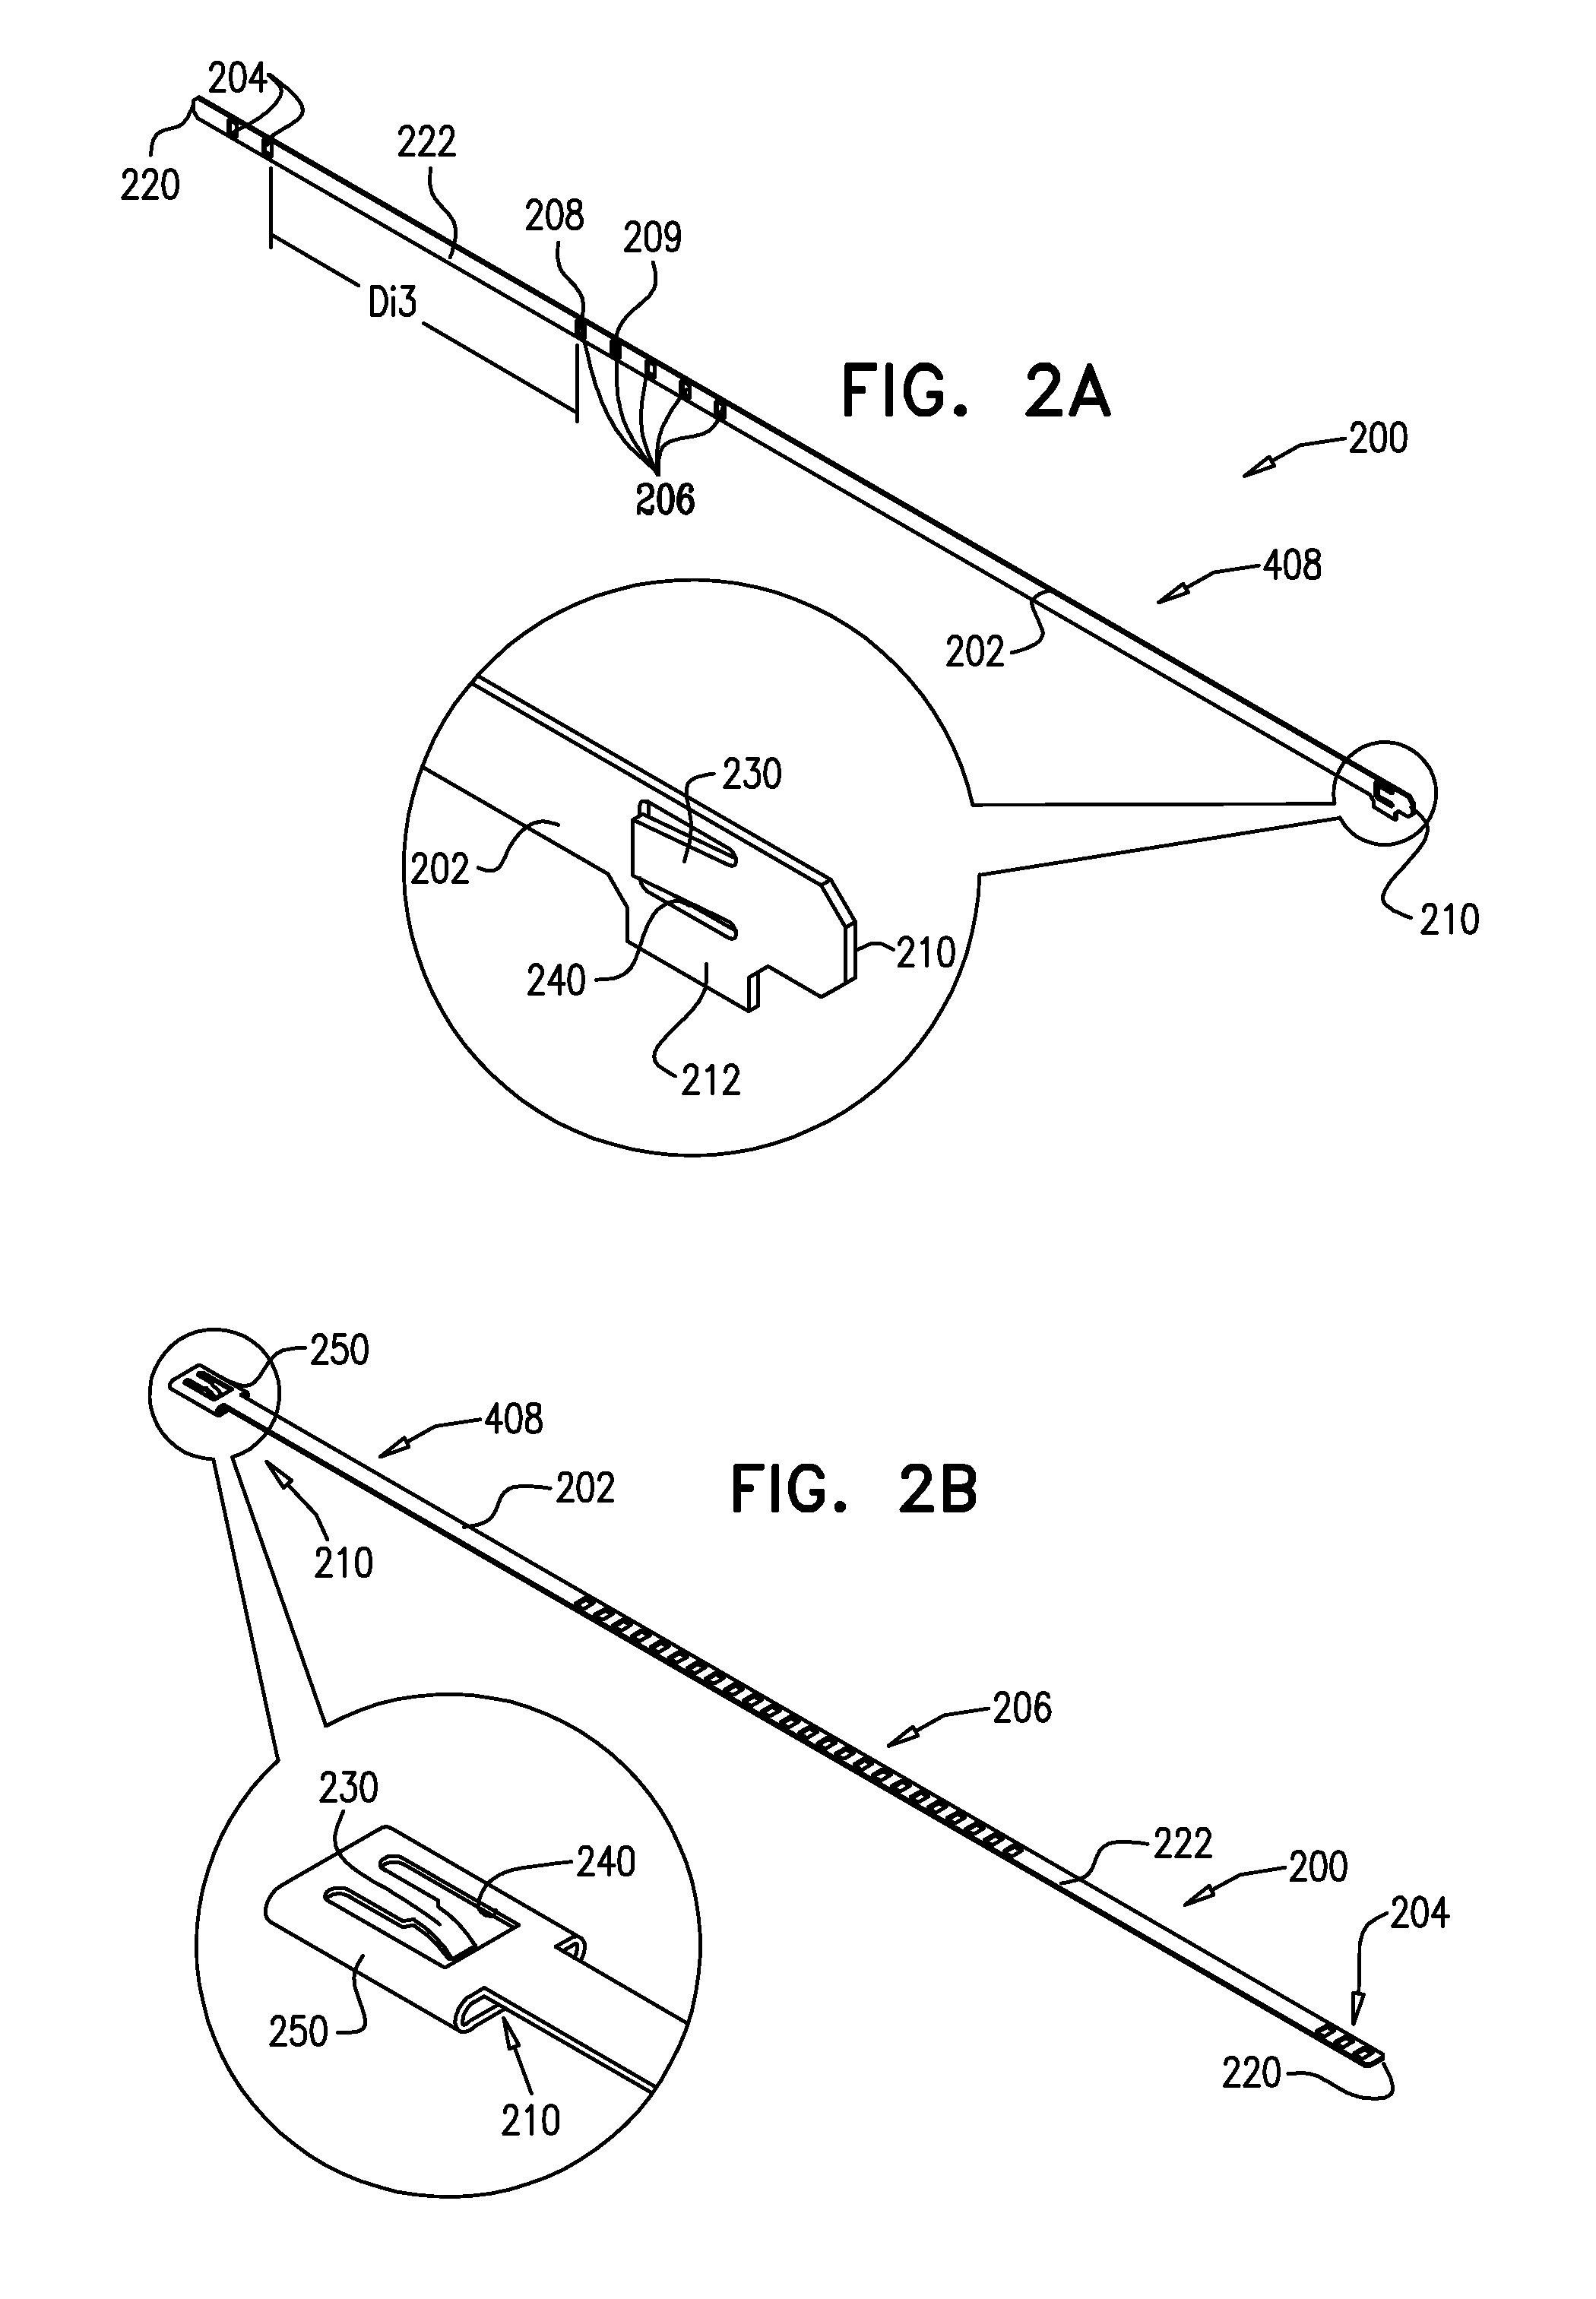 Implant and anchor placement